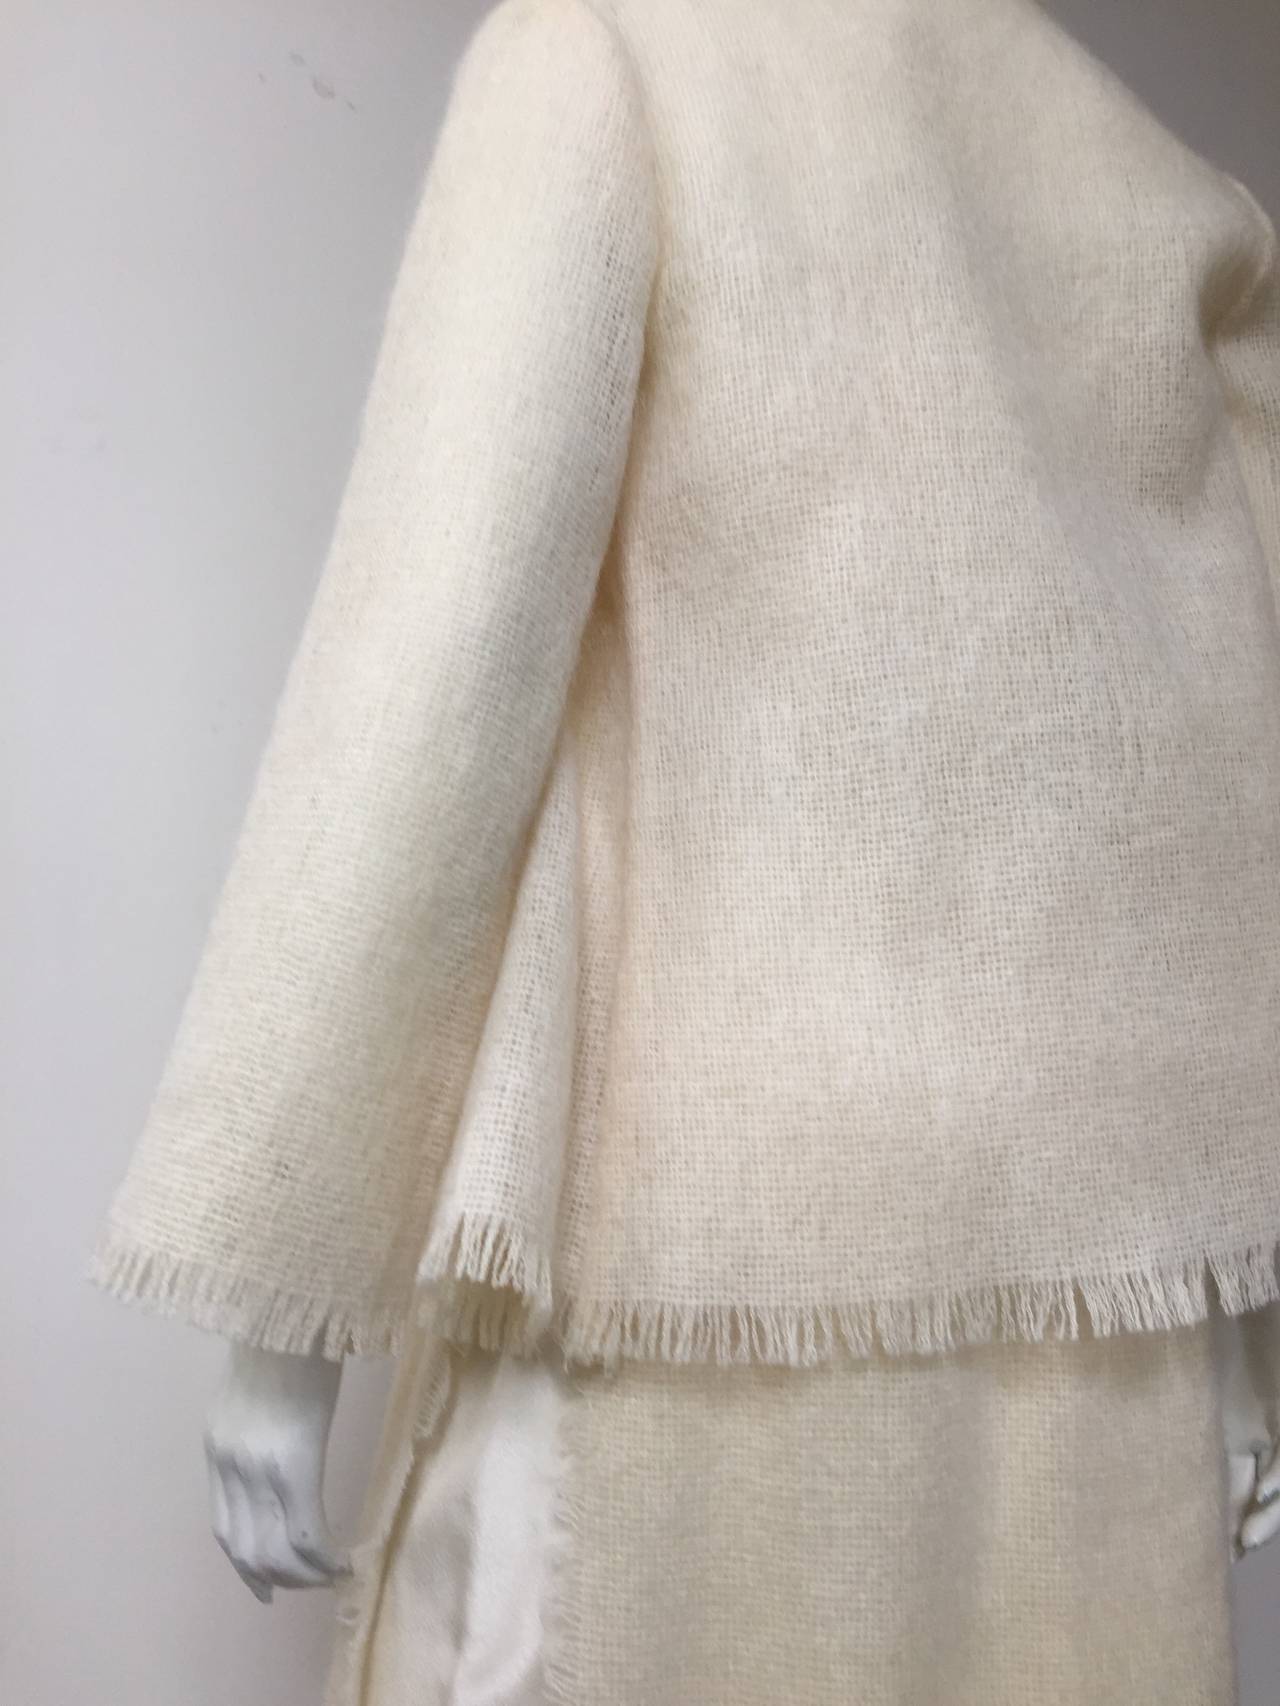 Fiandaca Couturier Silk / Mohair Dress with Jacket Size 6. For Sale 2